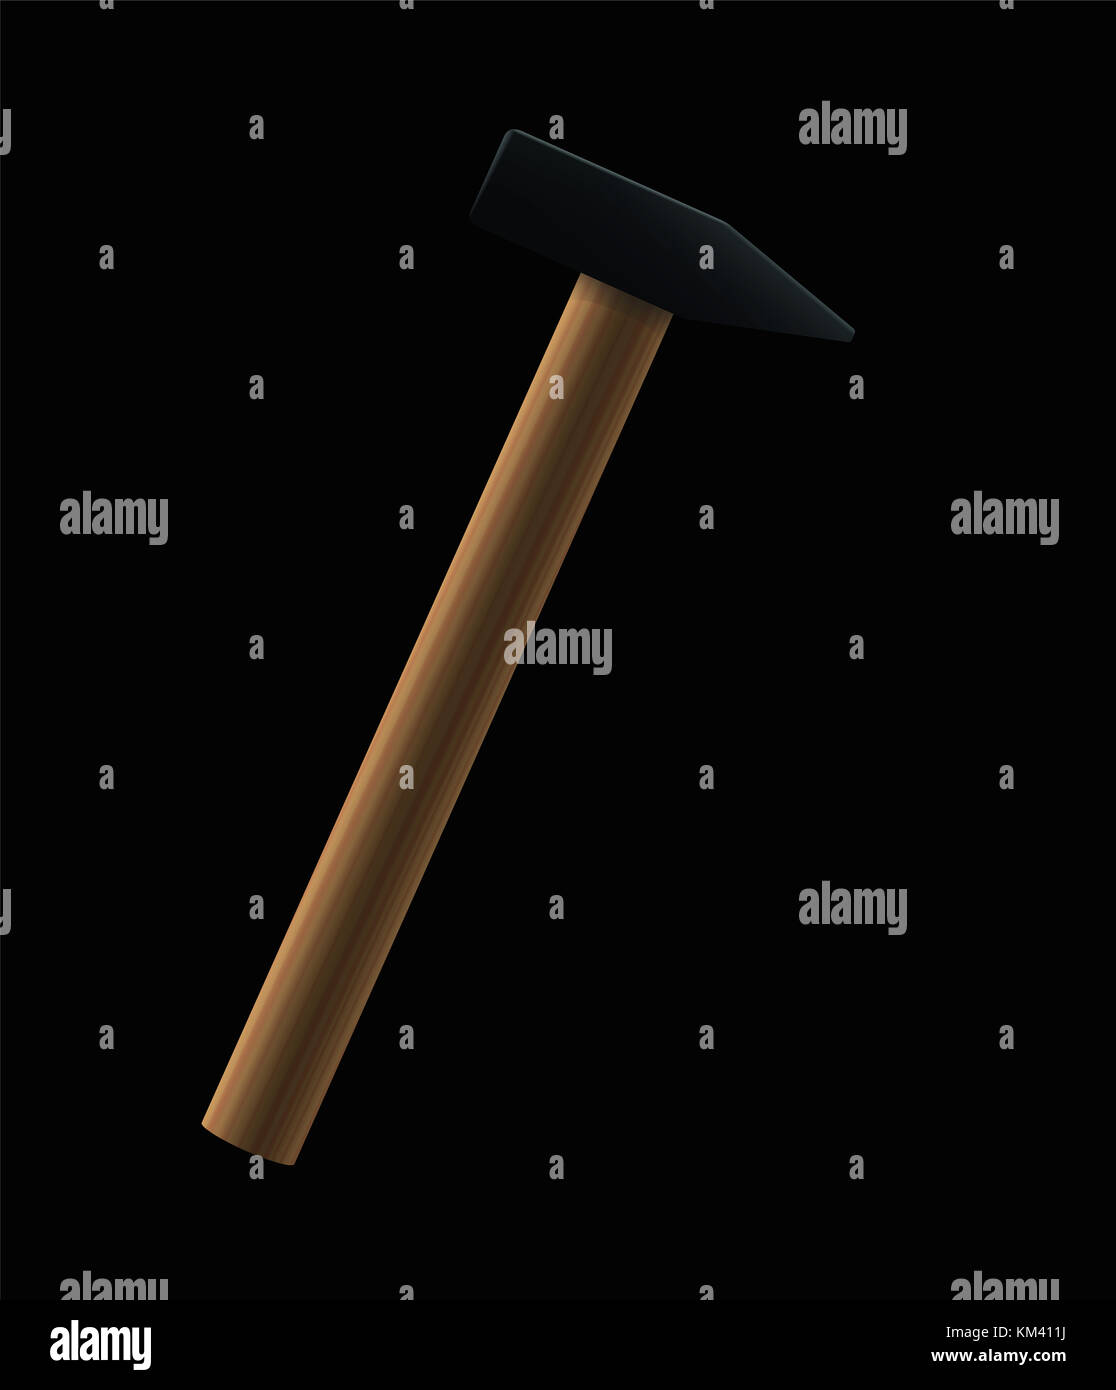 Hammer on black background - basic hand tool with wooden handle and black iron head - illustration on black background. Stock Photo